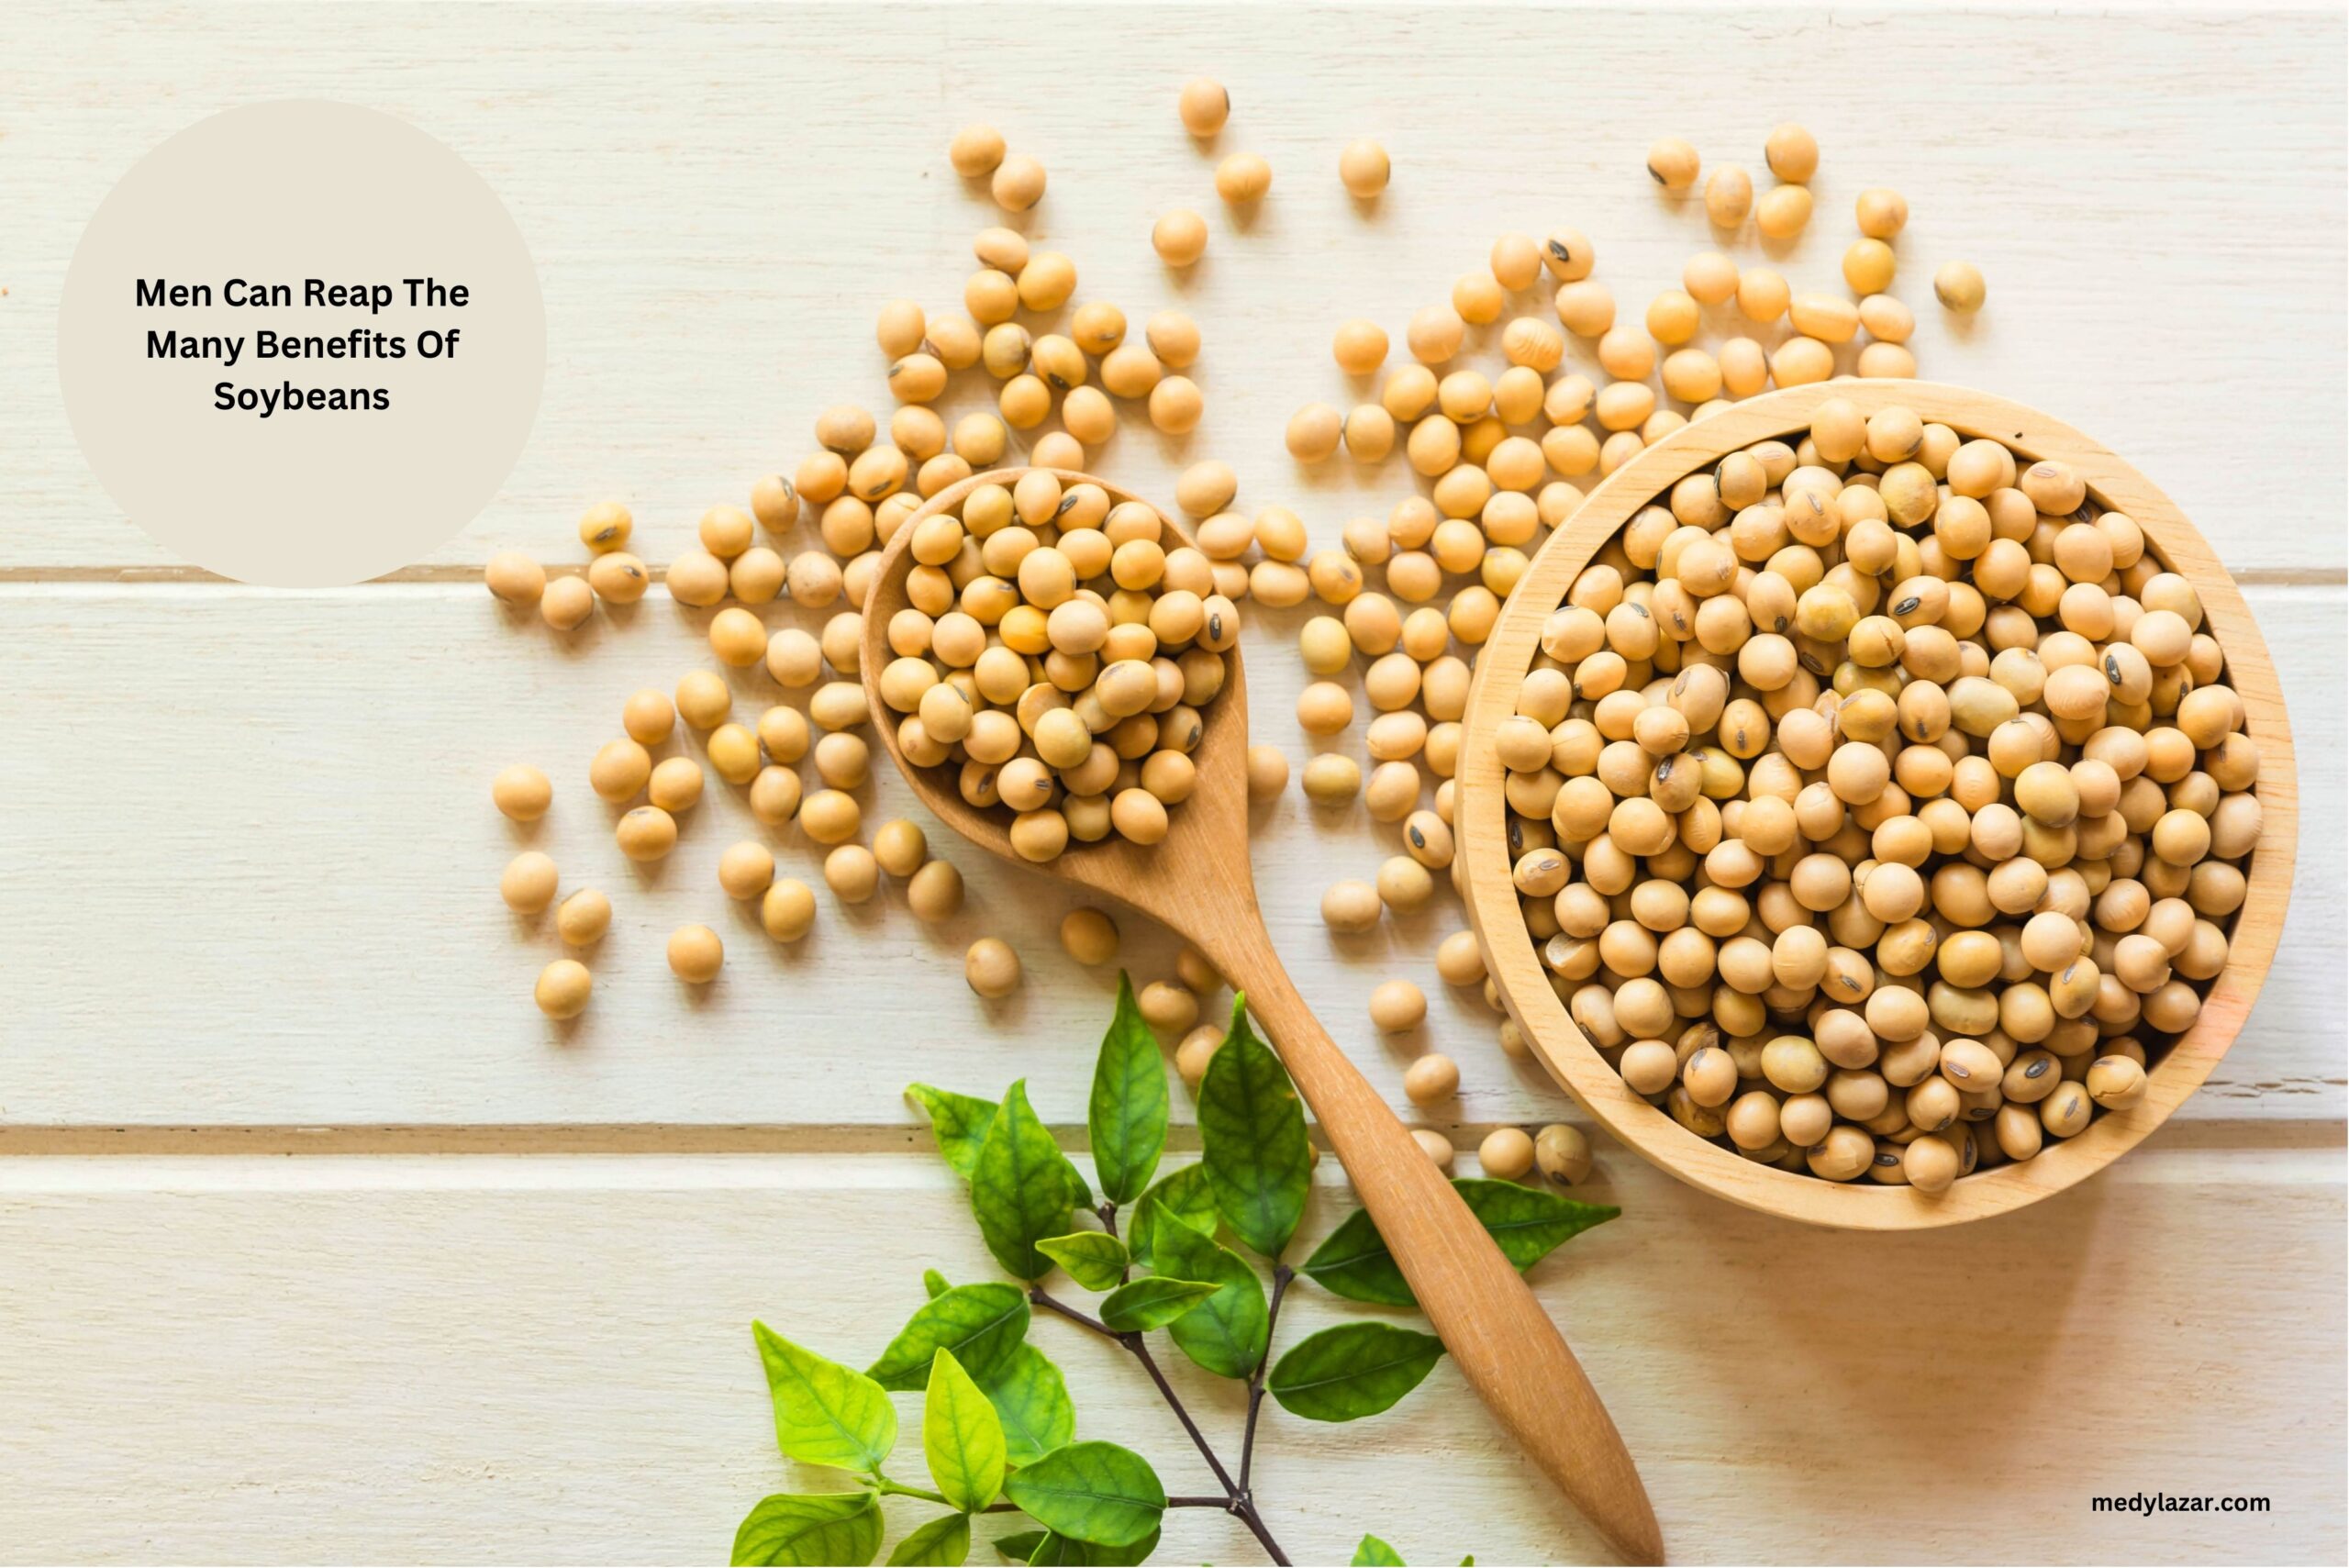 Men Can Reap The Many Benefits Of Soybeans